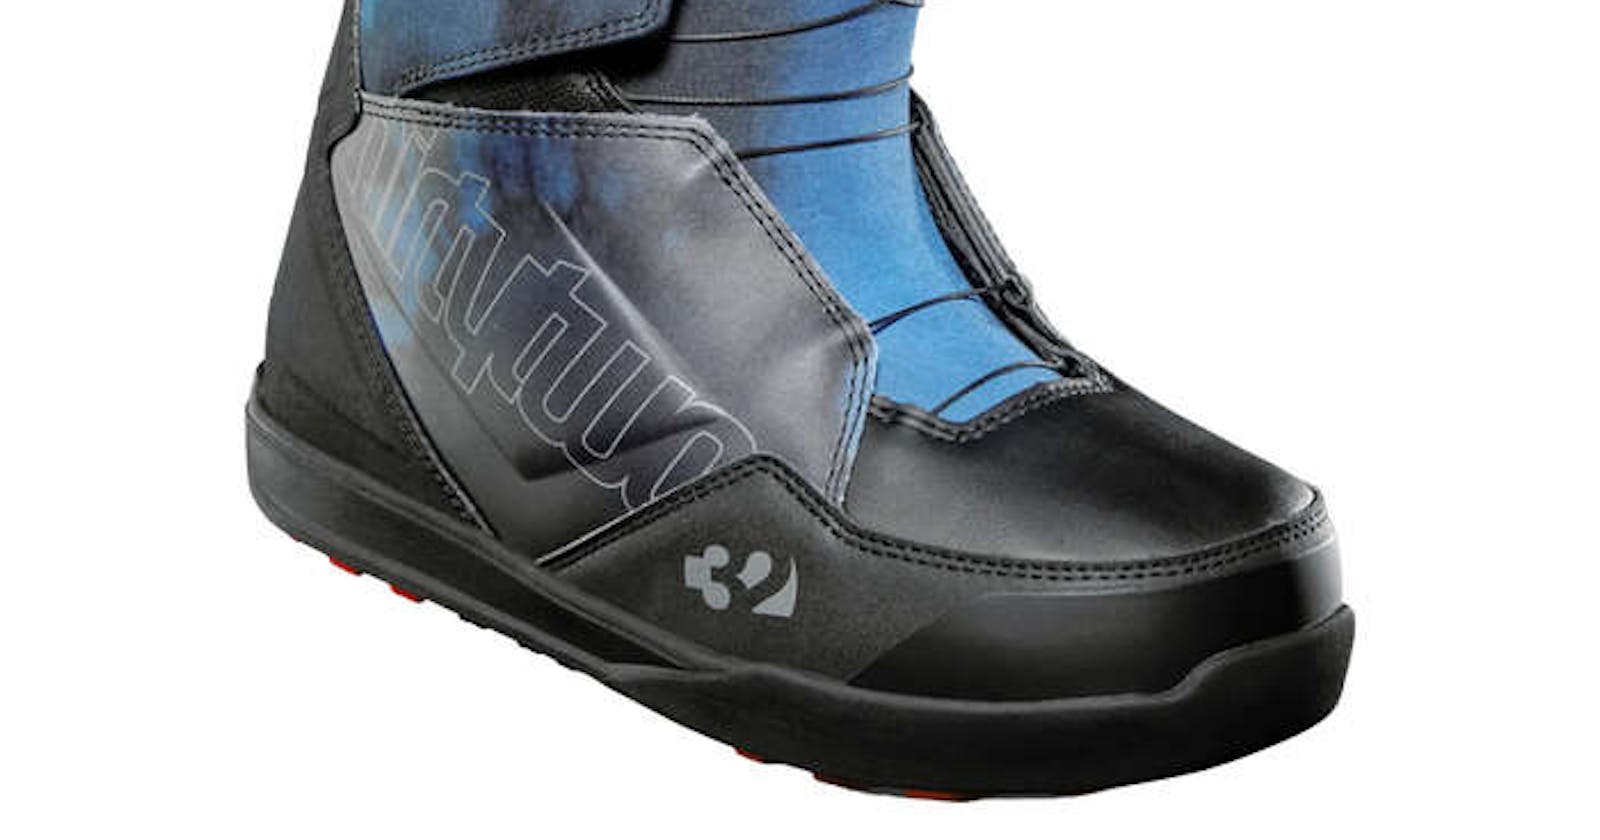 ThirtyTwo Lashed Double BOA: Where Comfort Meets Speed